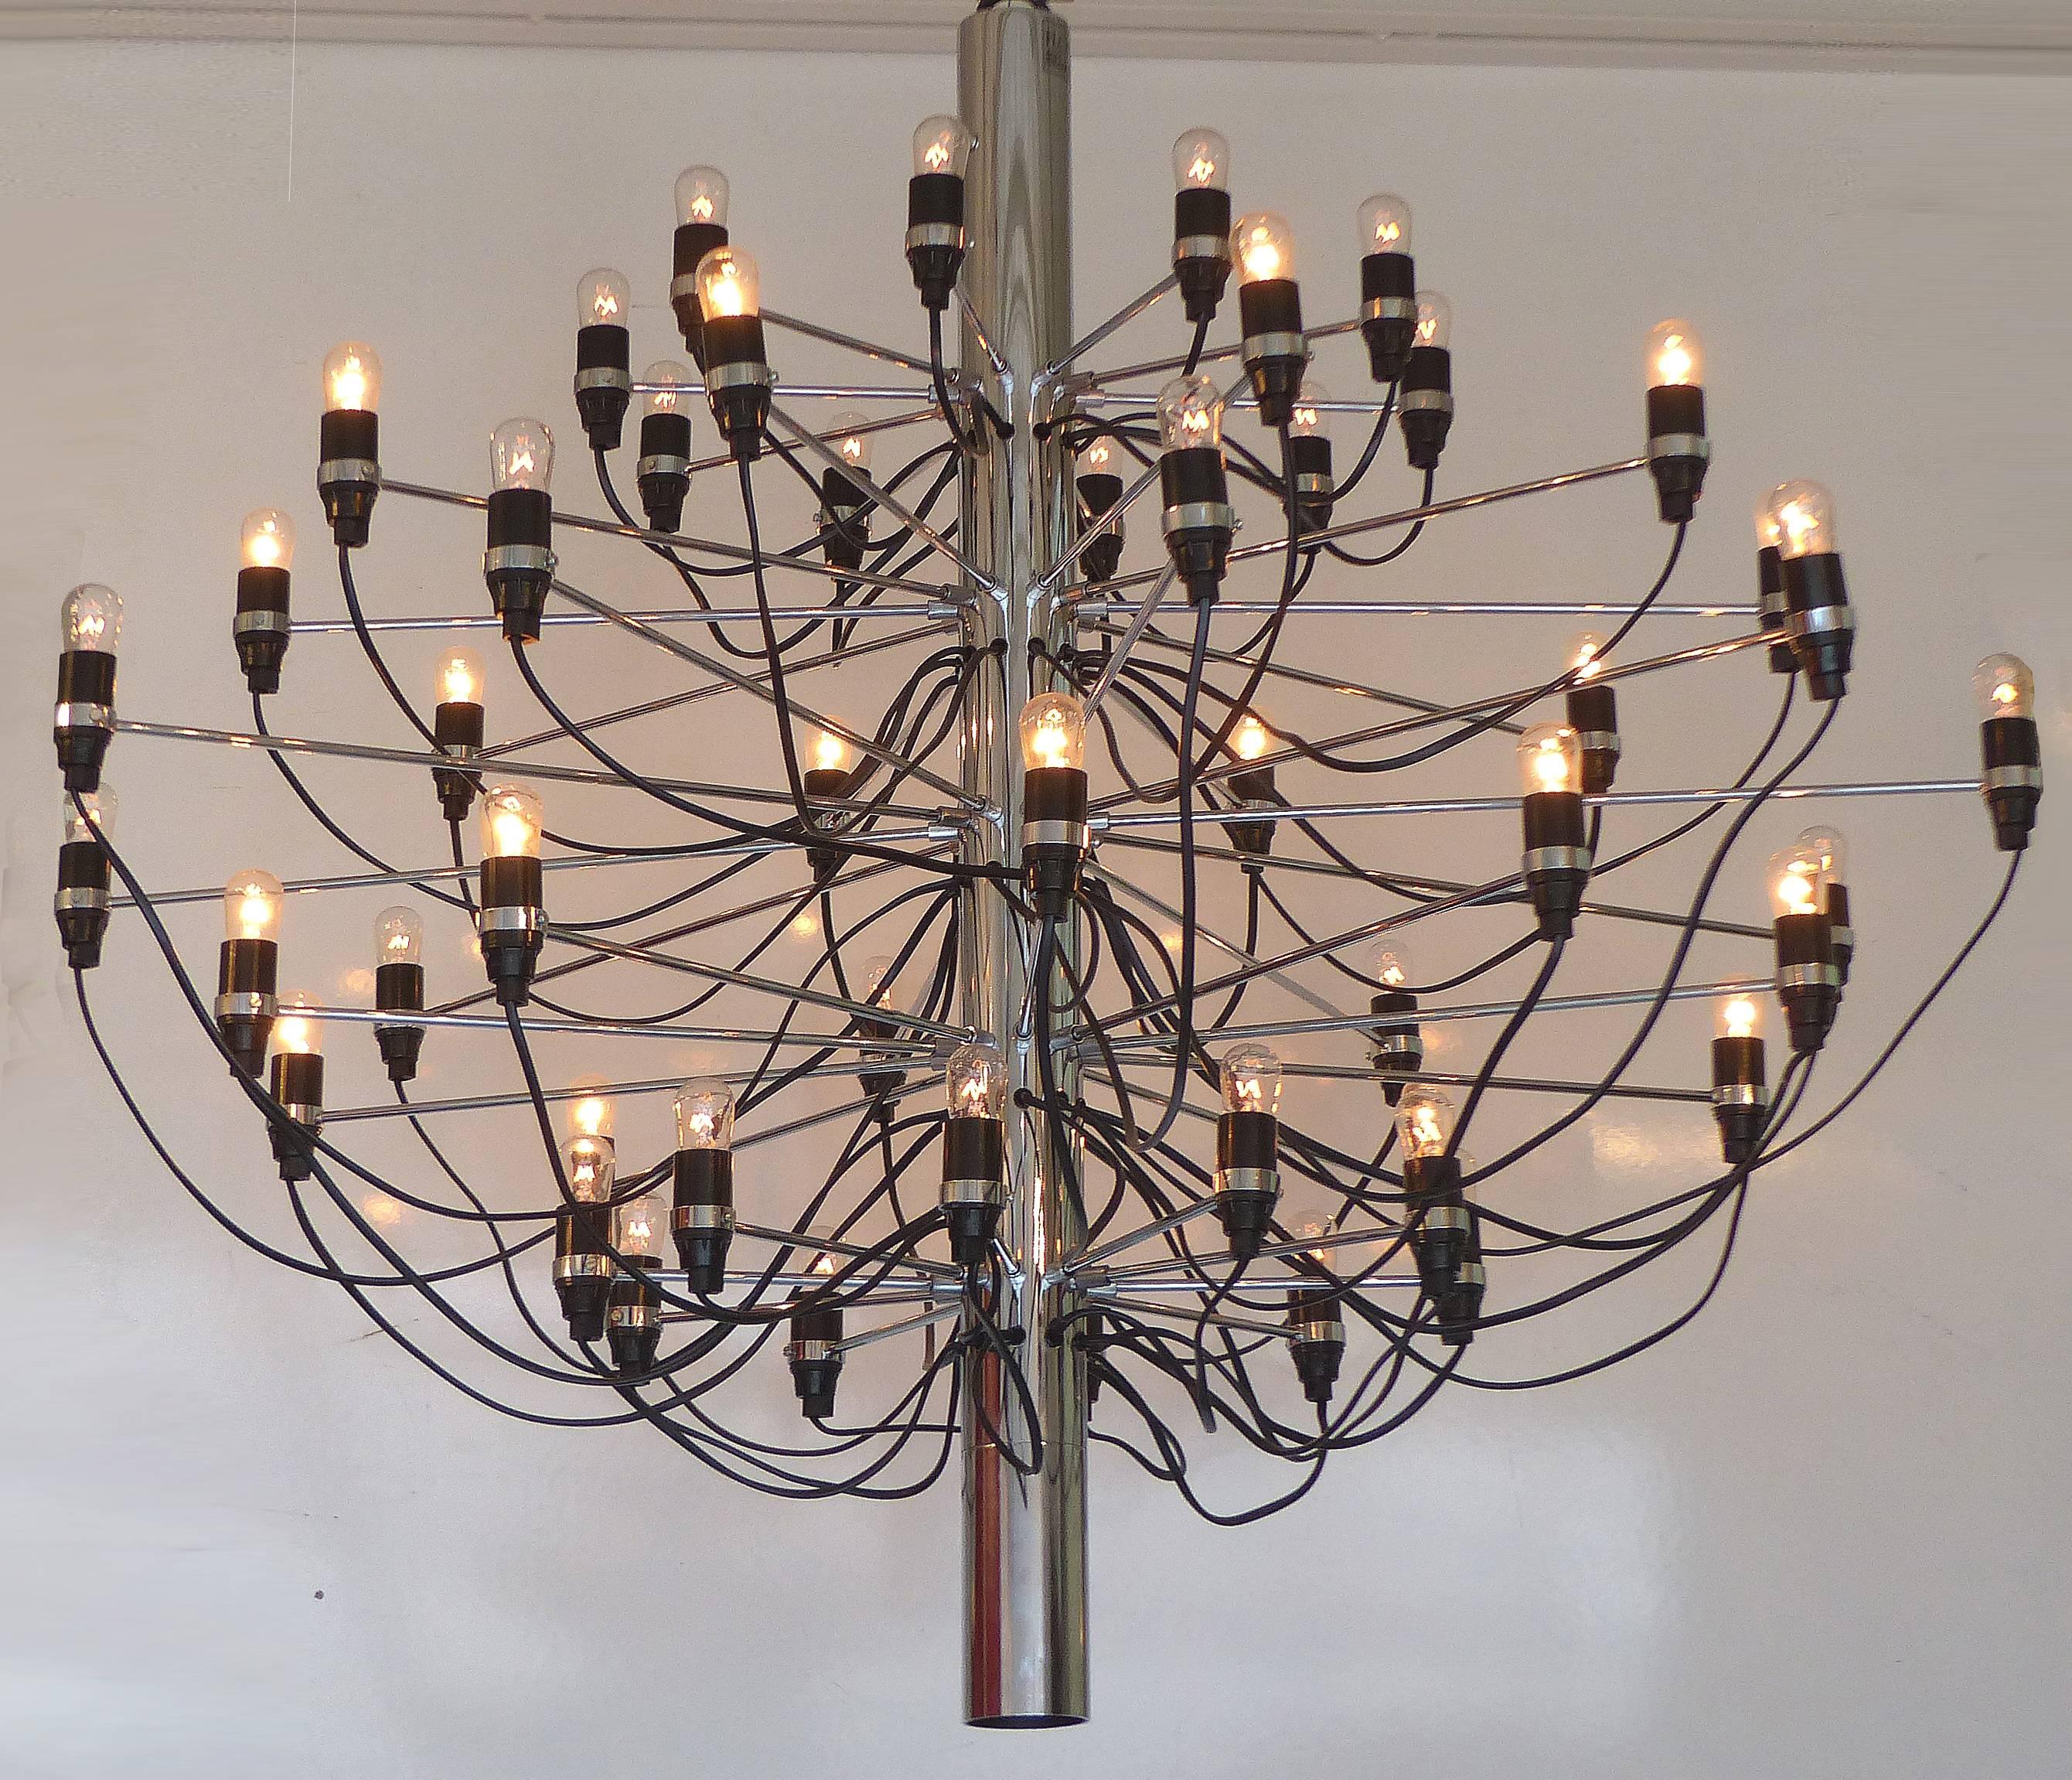 A timeless Mid-Century Modern 50 light Gino Sarfatti Model number 2097/50 chandelier, originally designed by Sarfatti in 1958 in tubular chrome for Flos of Italy. Flos purchased Arteluce, the company originally founded by Gino Sarfatti in 1939. The